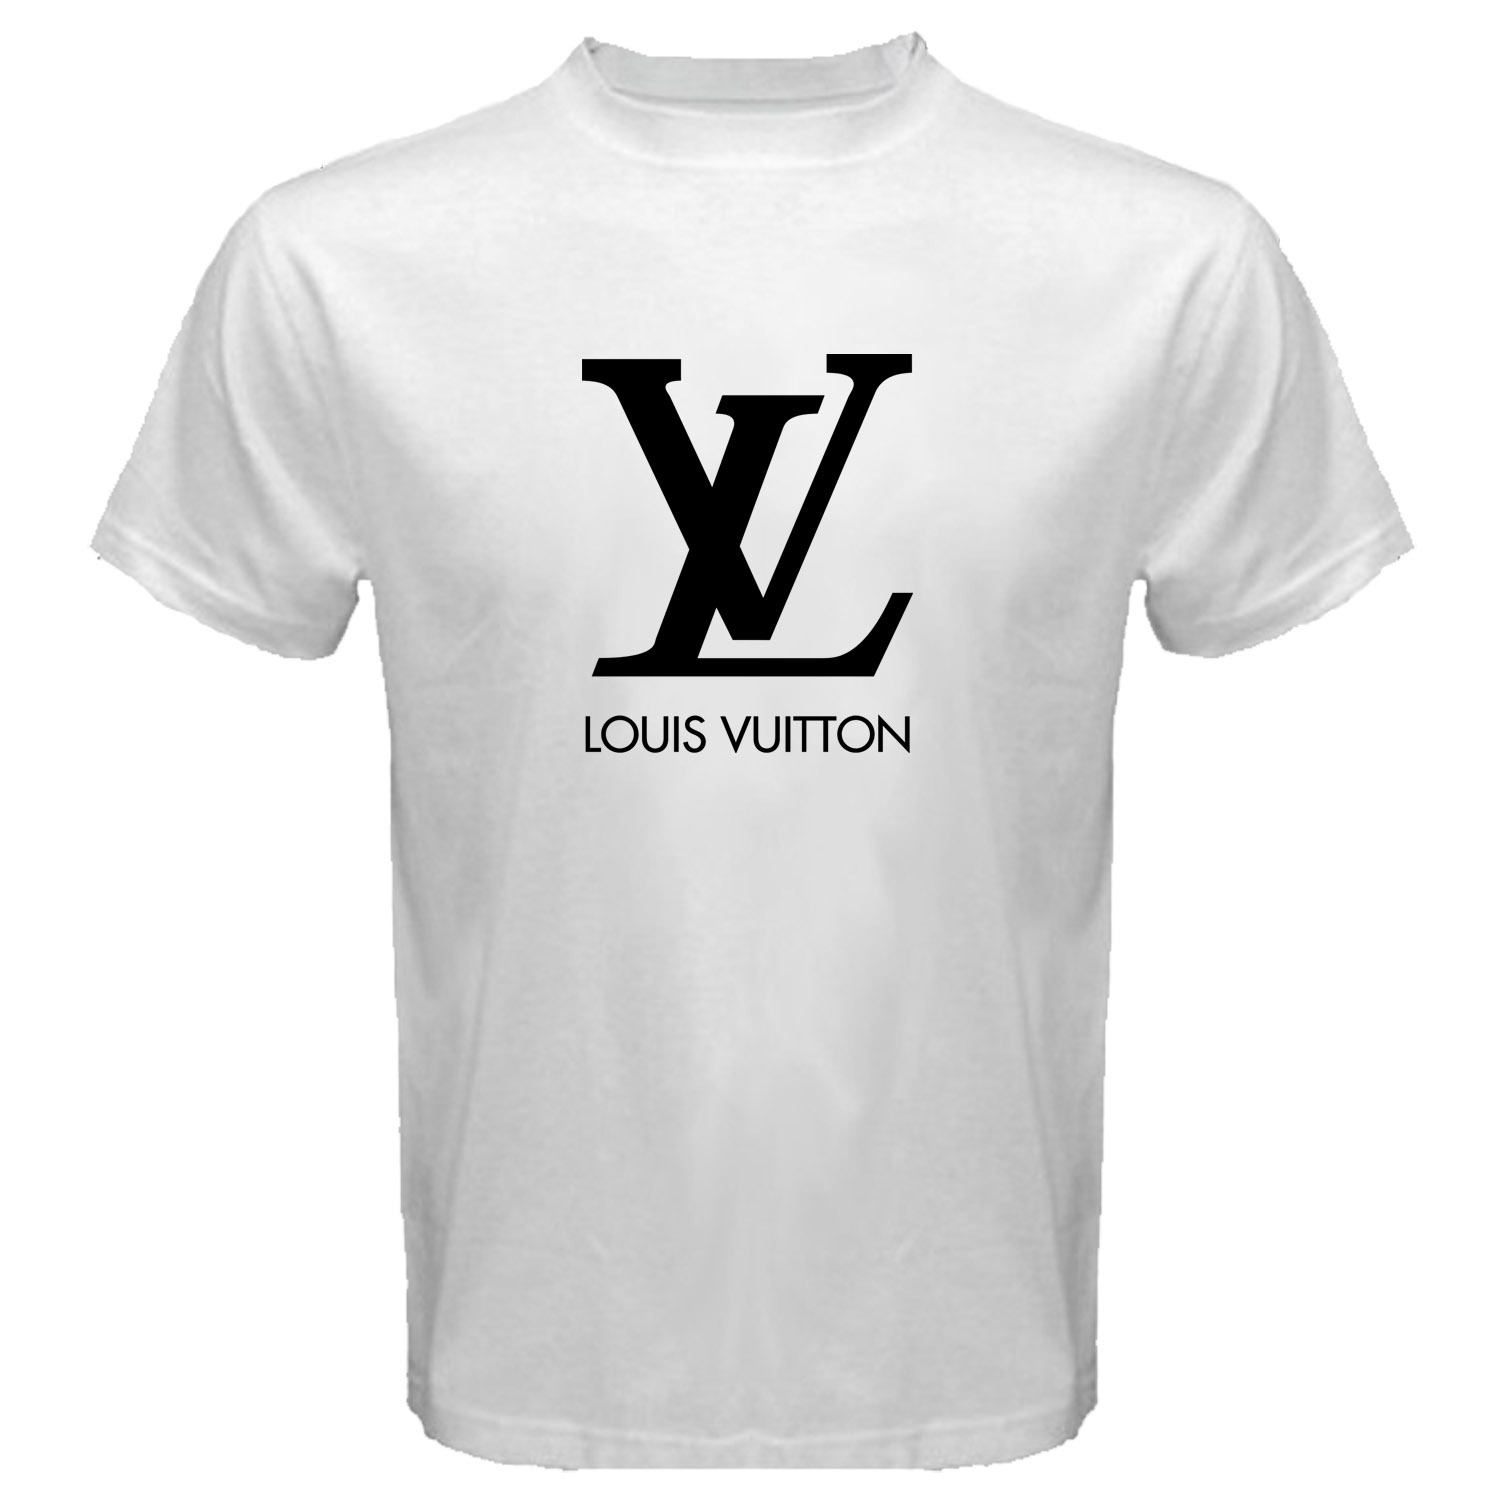 LOUIS VUITTON Official USA Website - Explore the World of Louis Vuitton, read our latest News, discover our Women's and Men's Collections and locate our Stores.